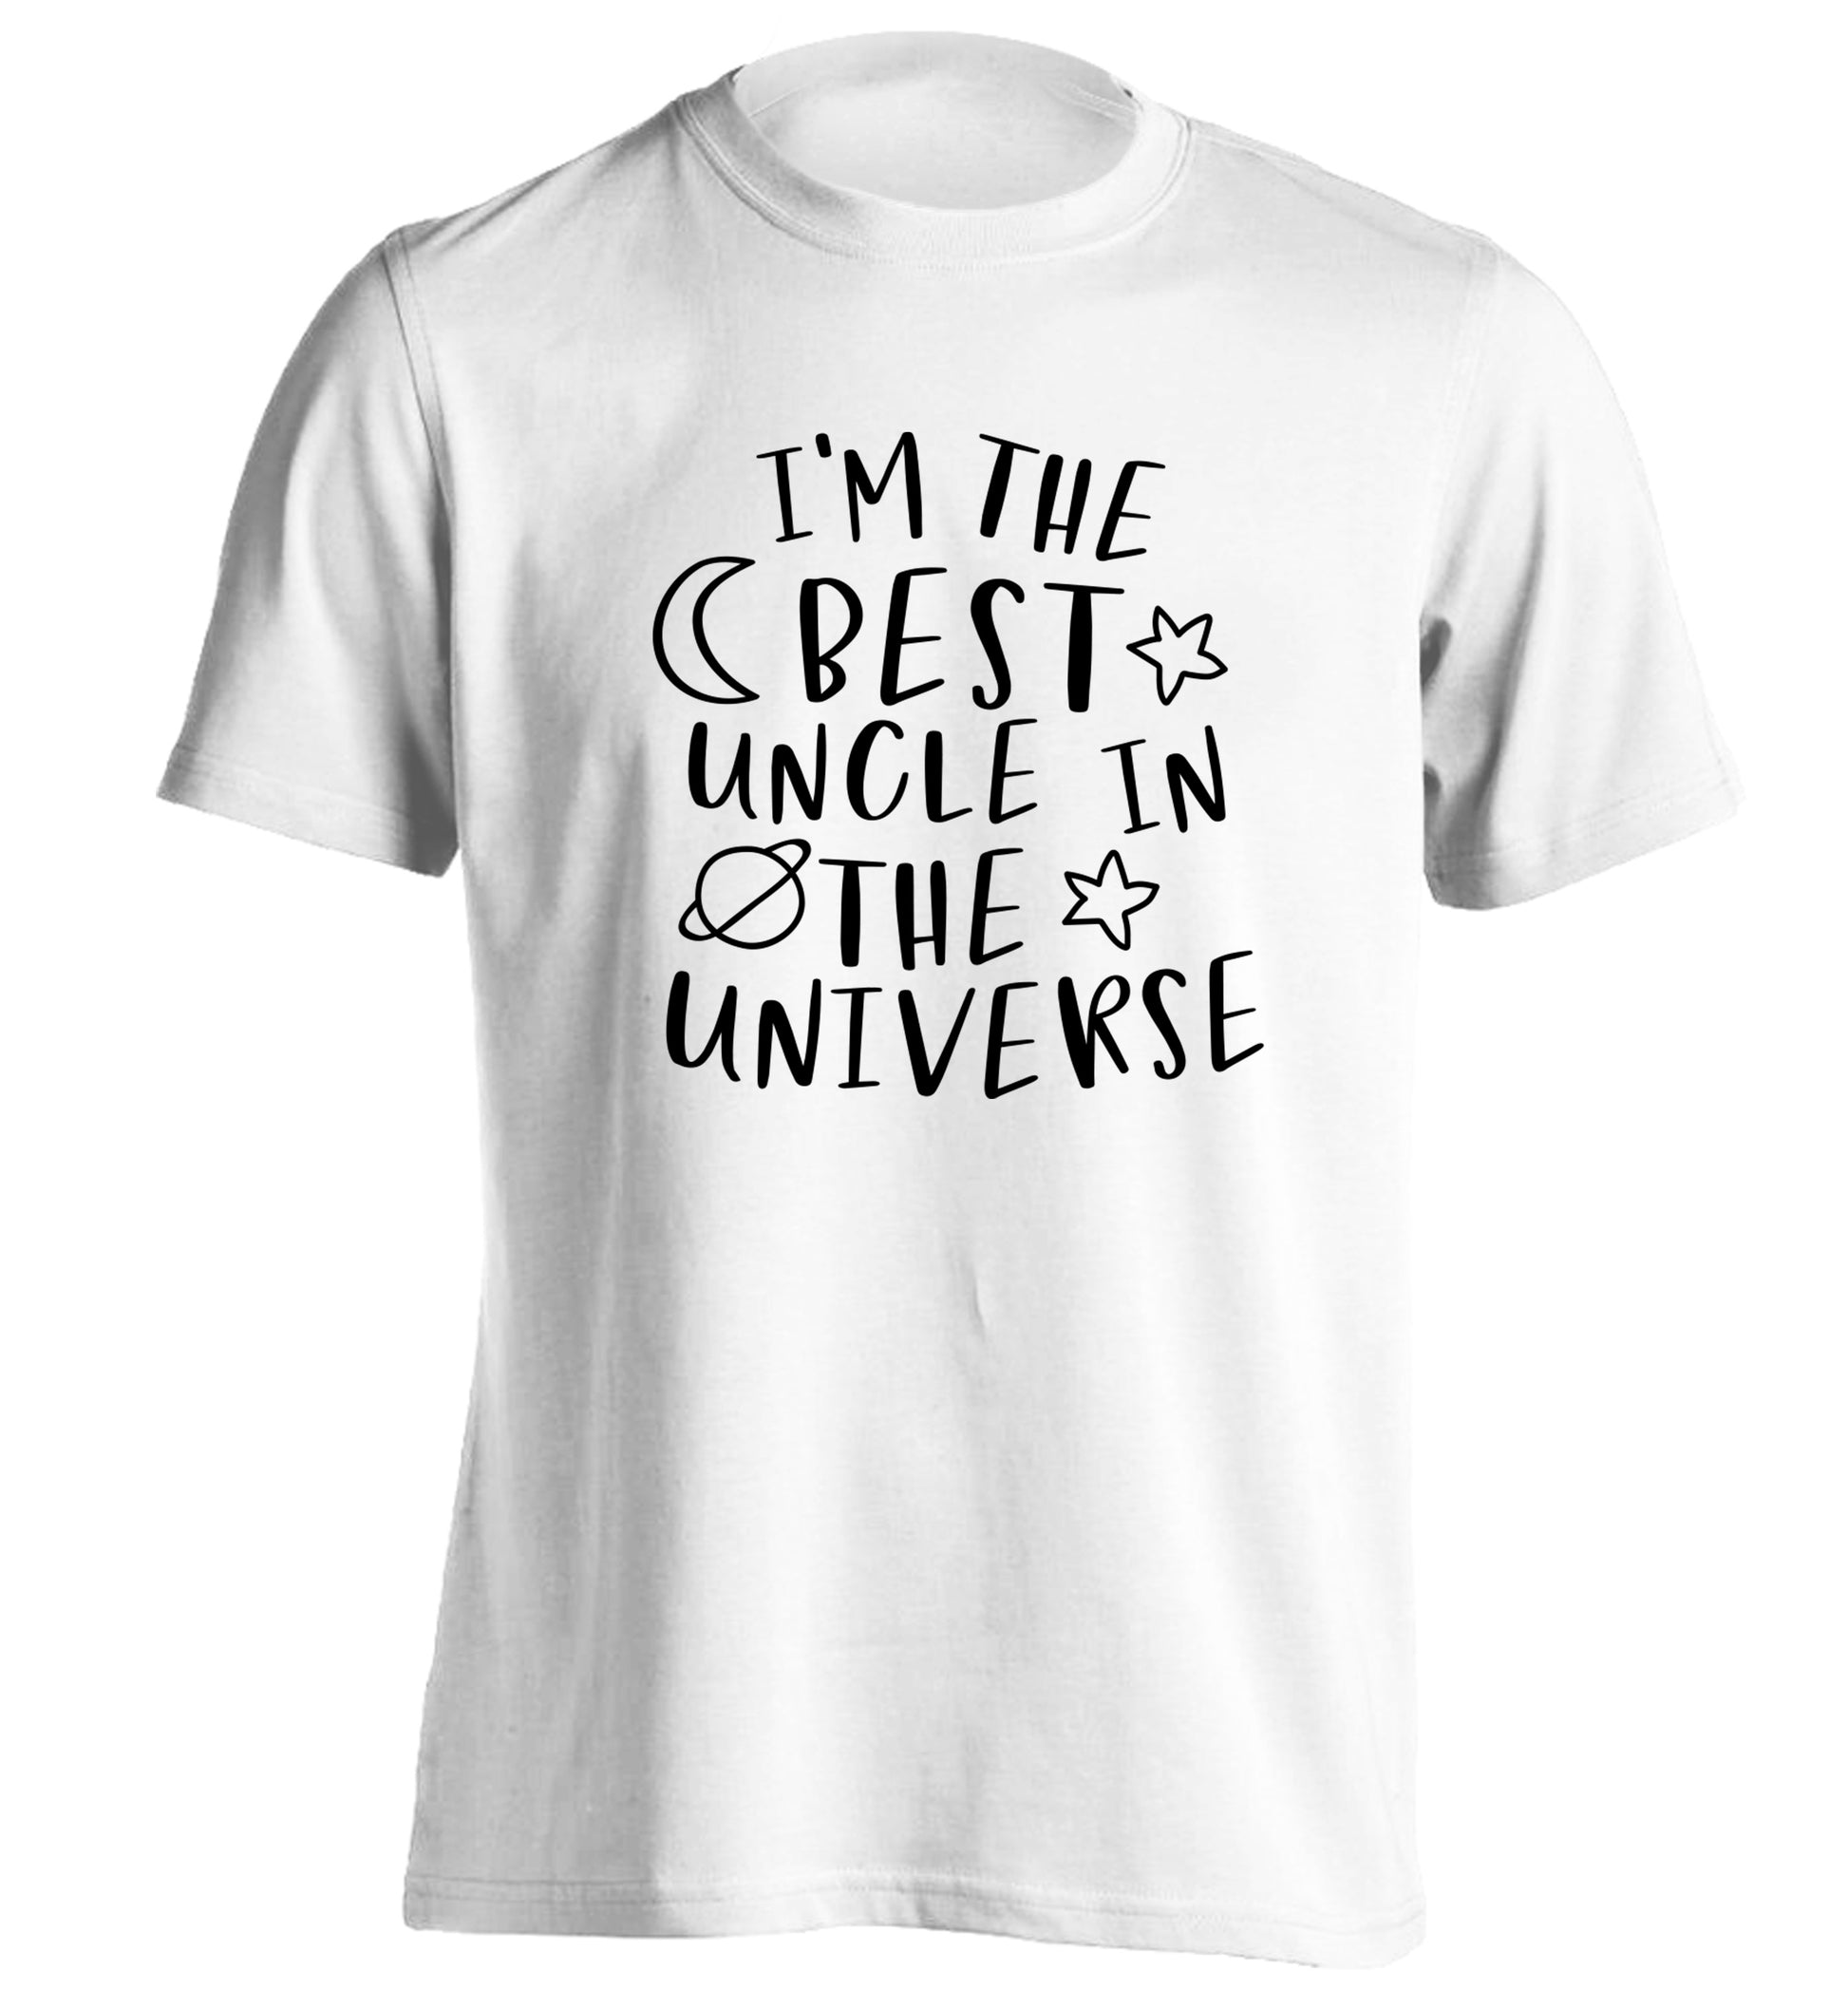 I'm the best uncle in the universe adults unisex white Tshirt 2XL